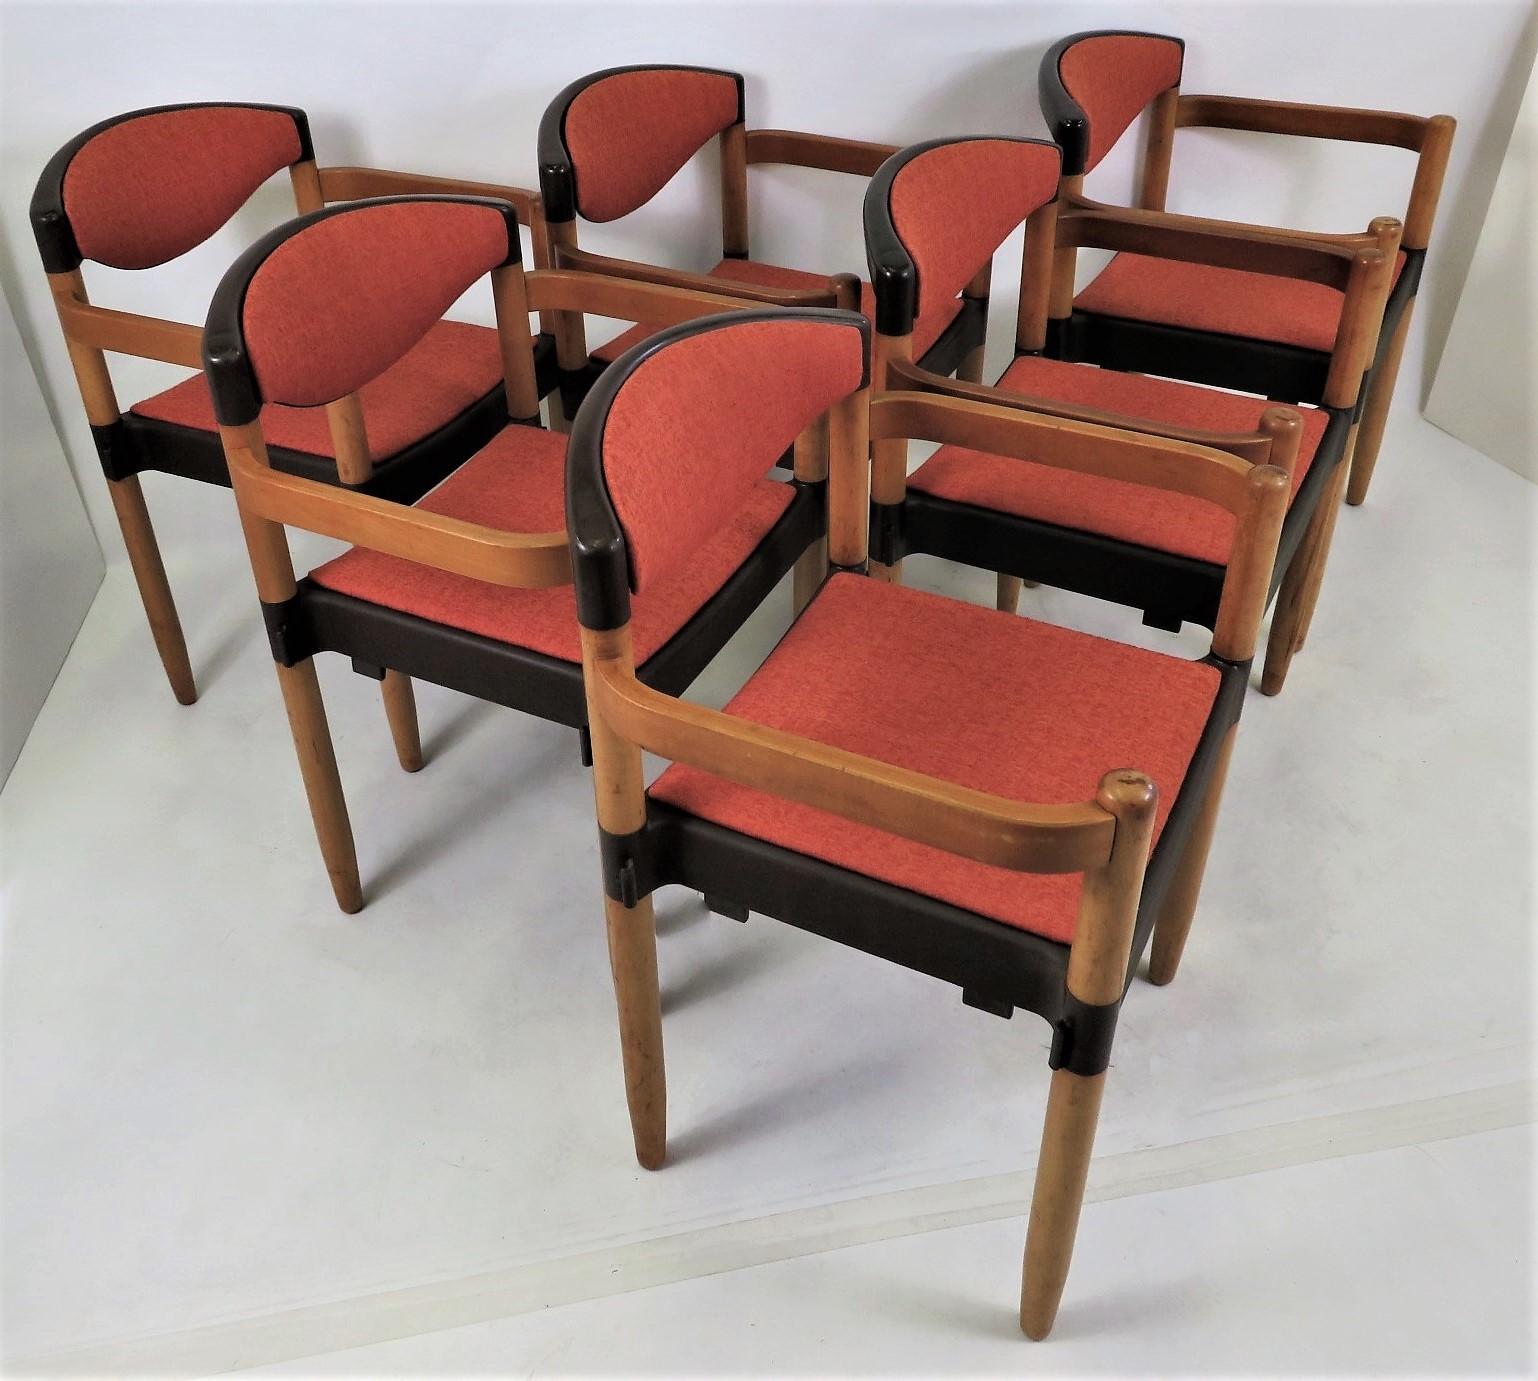 Designed by Harmut Lohmeyer in the 1970s and made by Casala in the late 70s. Called Strax, they are stackable. The seat and back cushions have been re-upholstered, the Beechwood has the original finish with age appropriate wear and finish fading and